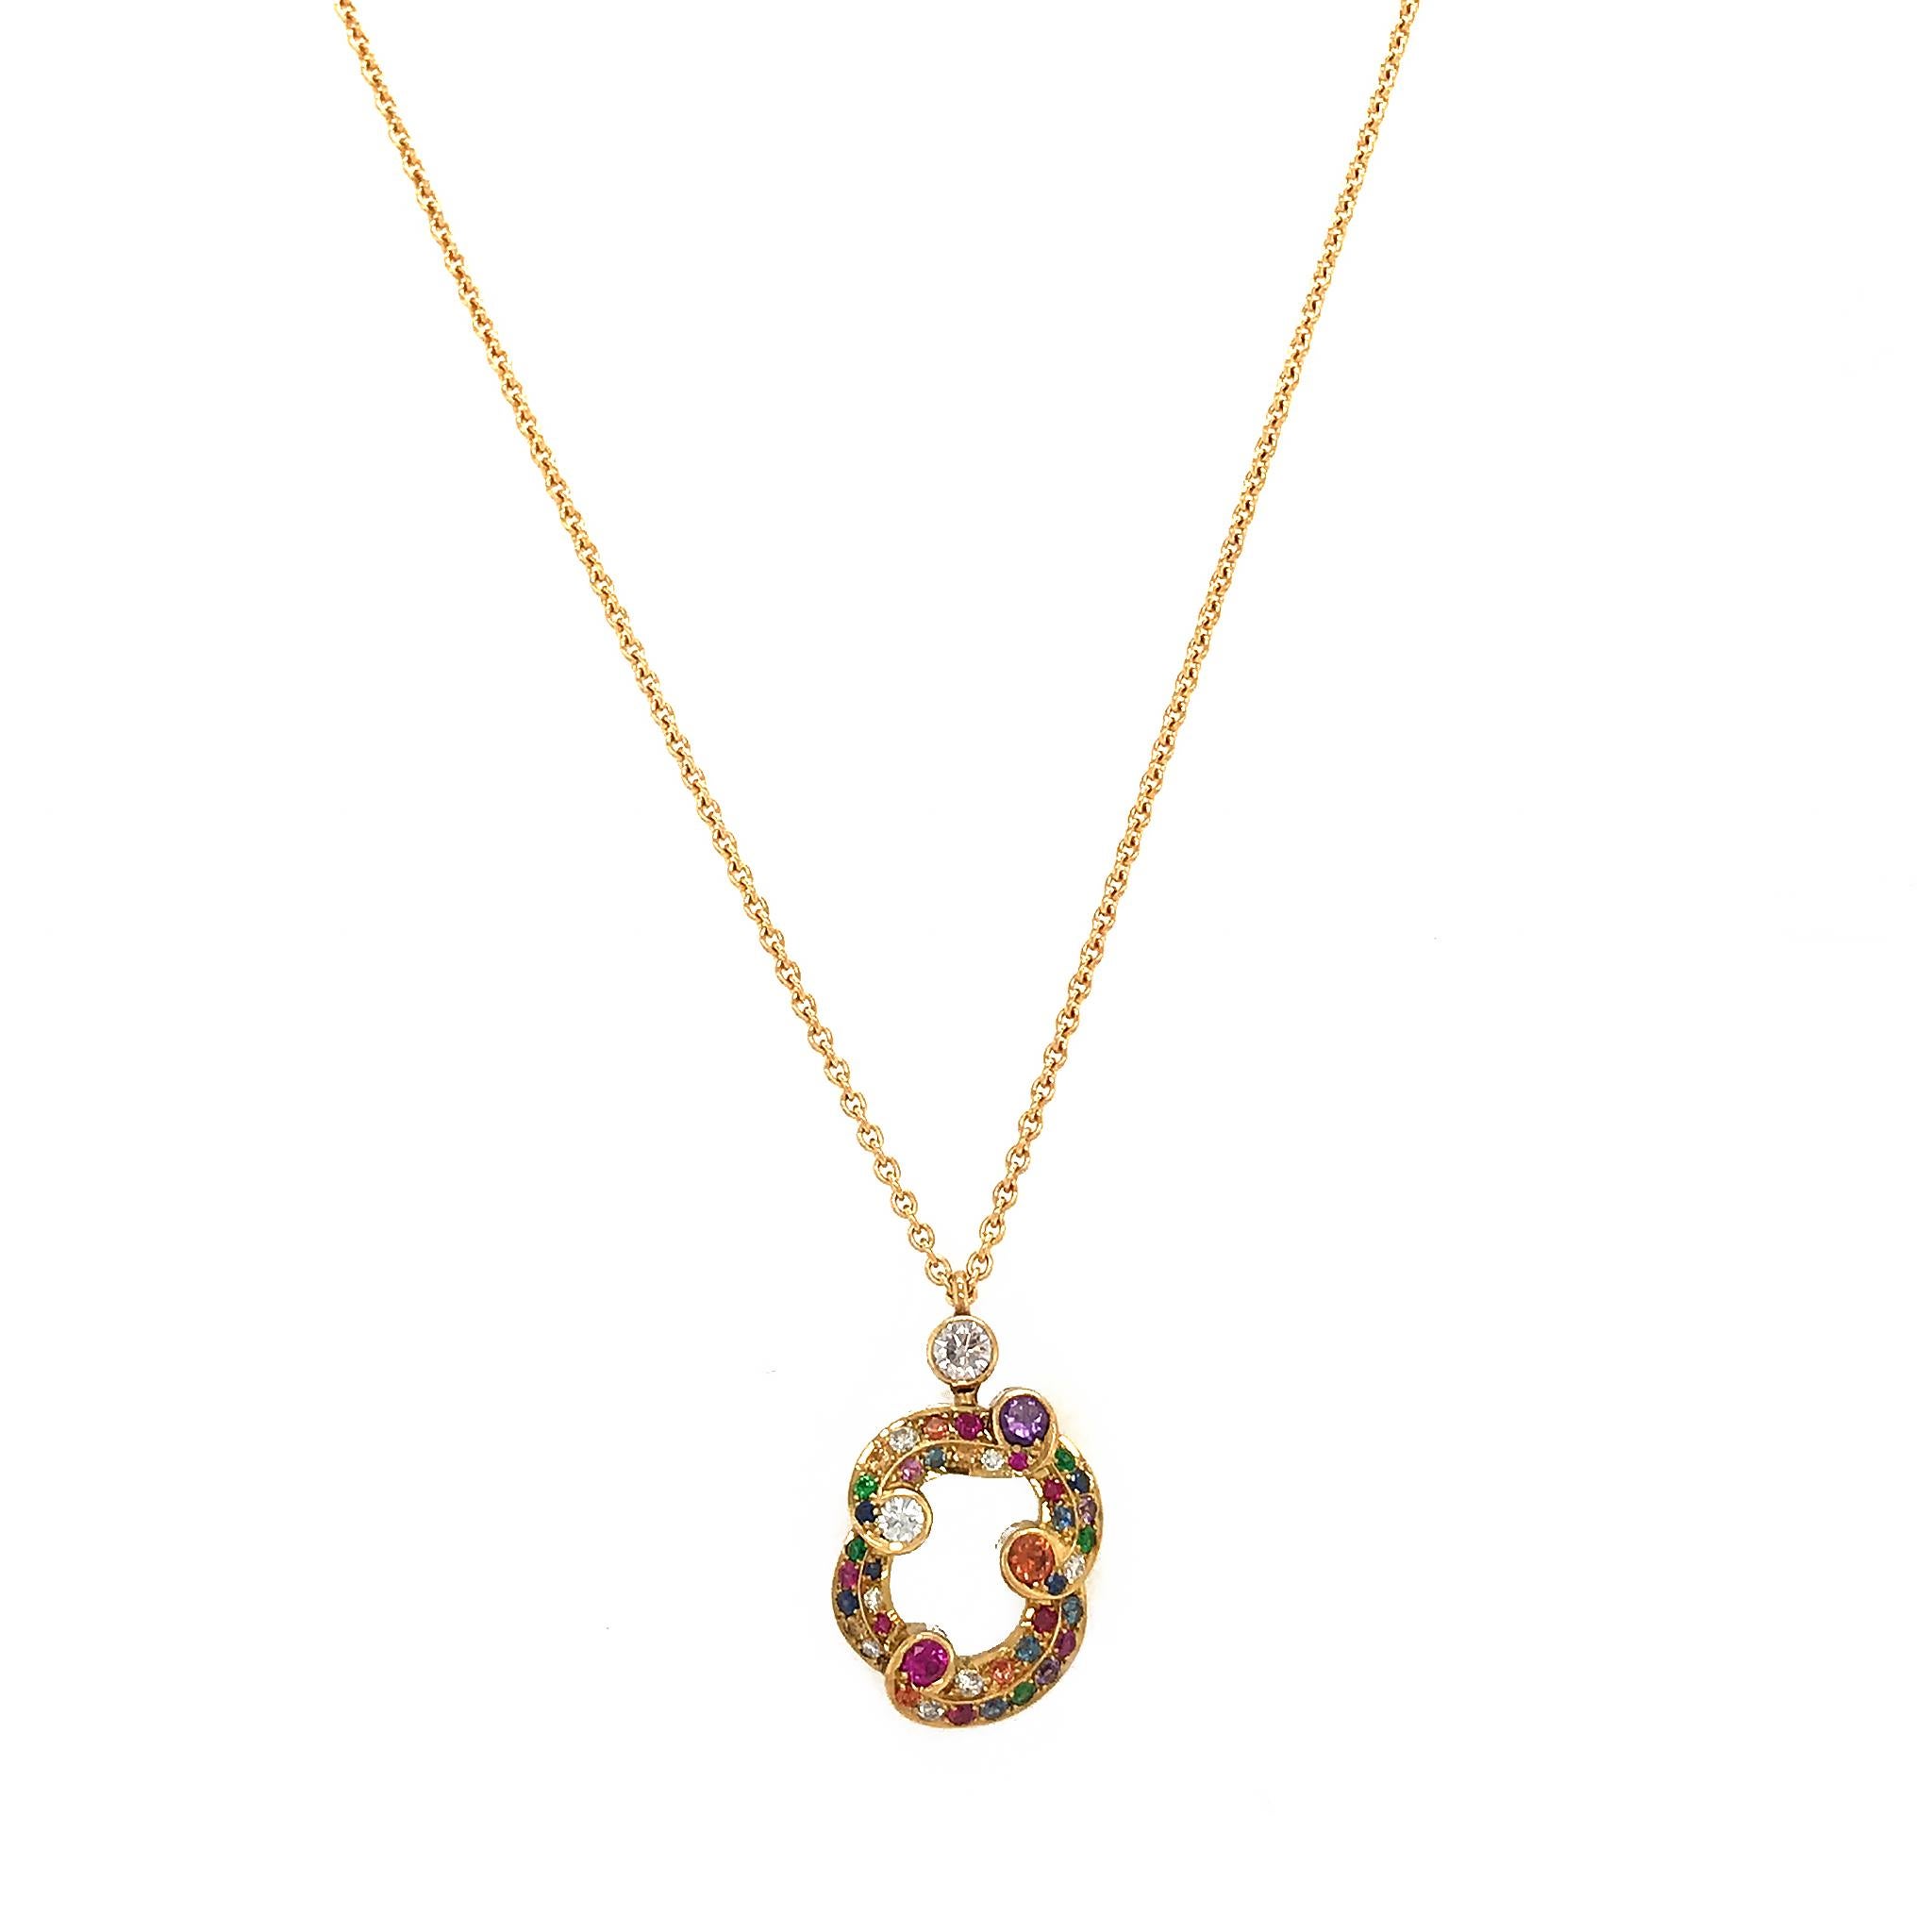 Round Cut Modern Fabergé Rococo 18 Karat Yellow Gold Multicolored Pendant Necklace For Sale